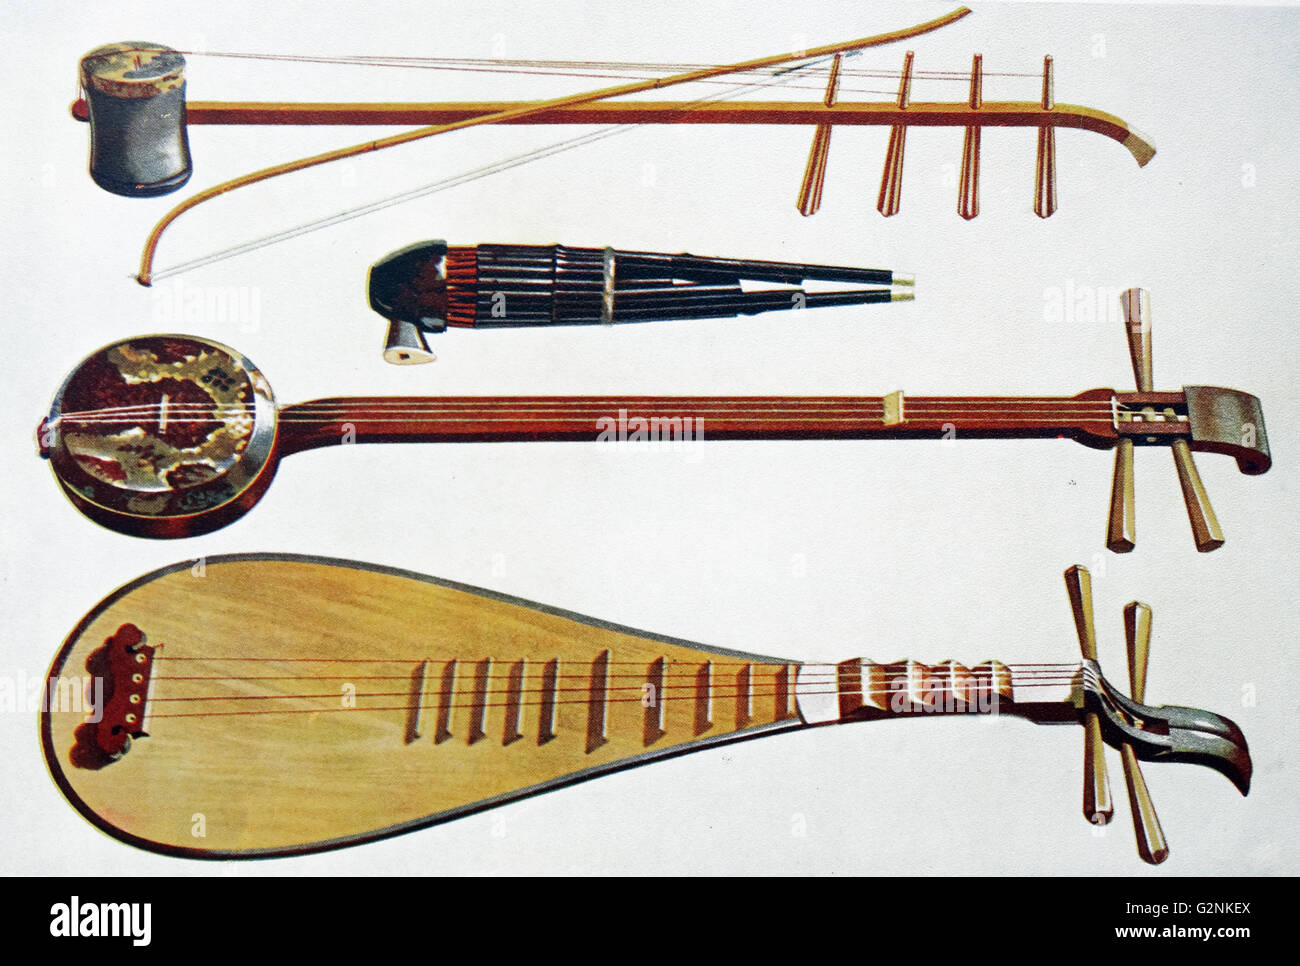 Hu-Ch'in & Bow, Shêng, San-Hsien and P'i-P'a. The Hu-Ch'in (left) was one of the most popular musical instruments in Peking. The P'i-P'a had a body that was nearly a foot in diameter and was usually played by men who were hired as minstrels or ballad-singers in the South of China. Stock Photo